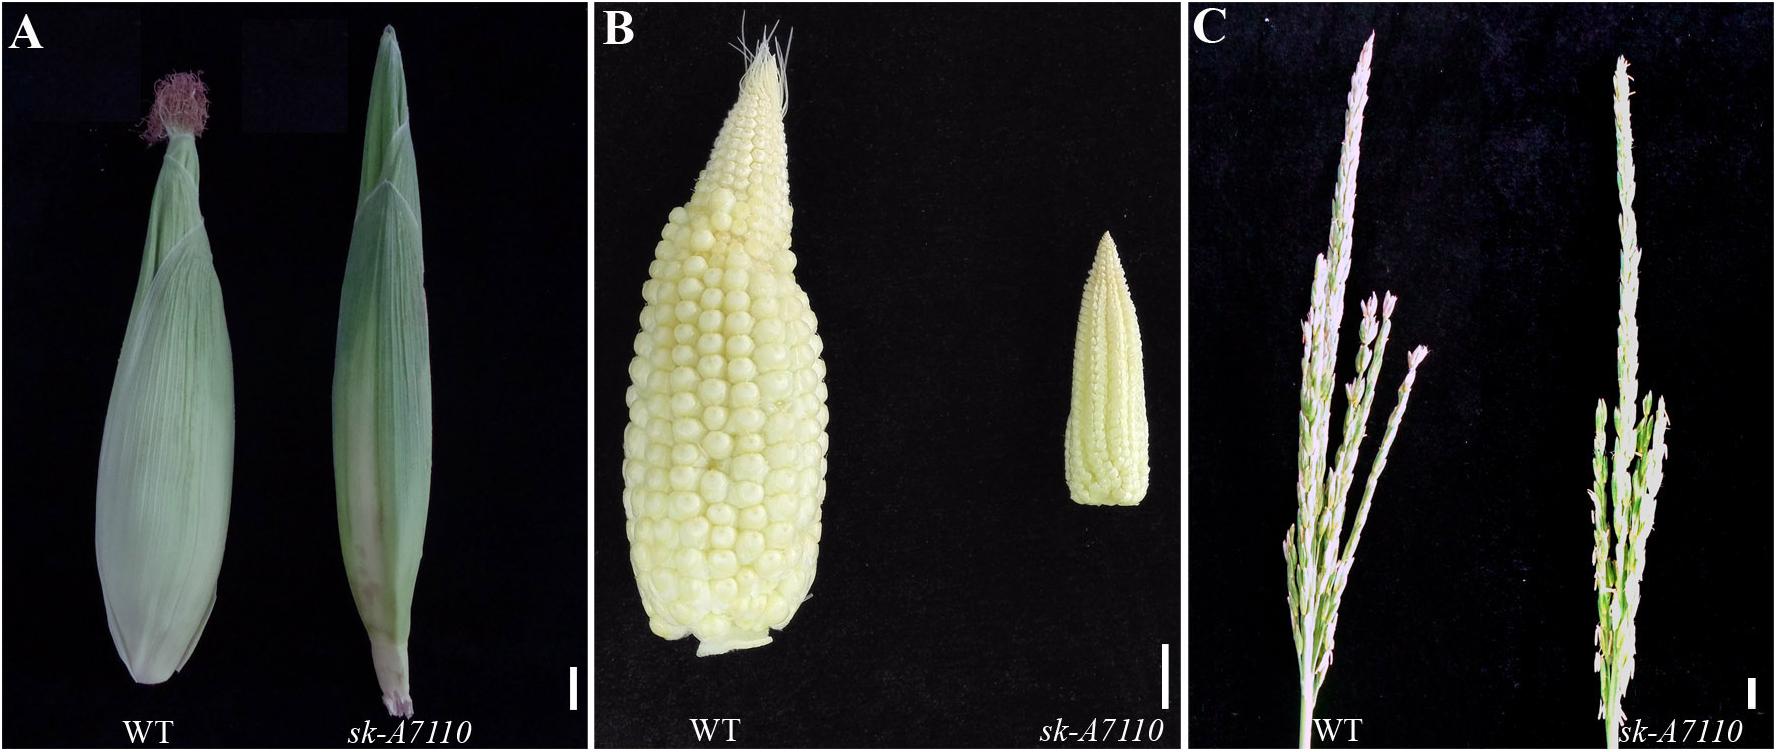 Three panel image of photographs showing organs from wild-type and a mutant strain of maize side-by-side. Panel 1: A ear of maize with silt at the tip next to a thinner ear of maize with no silk at the tip. Panel 2: Ears of maize with the husks removed. One ear is larger with many developed kernels, whereas one ear is much smaller. Panel 3: Tassels. One tassel is more branched than the other.